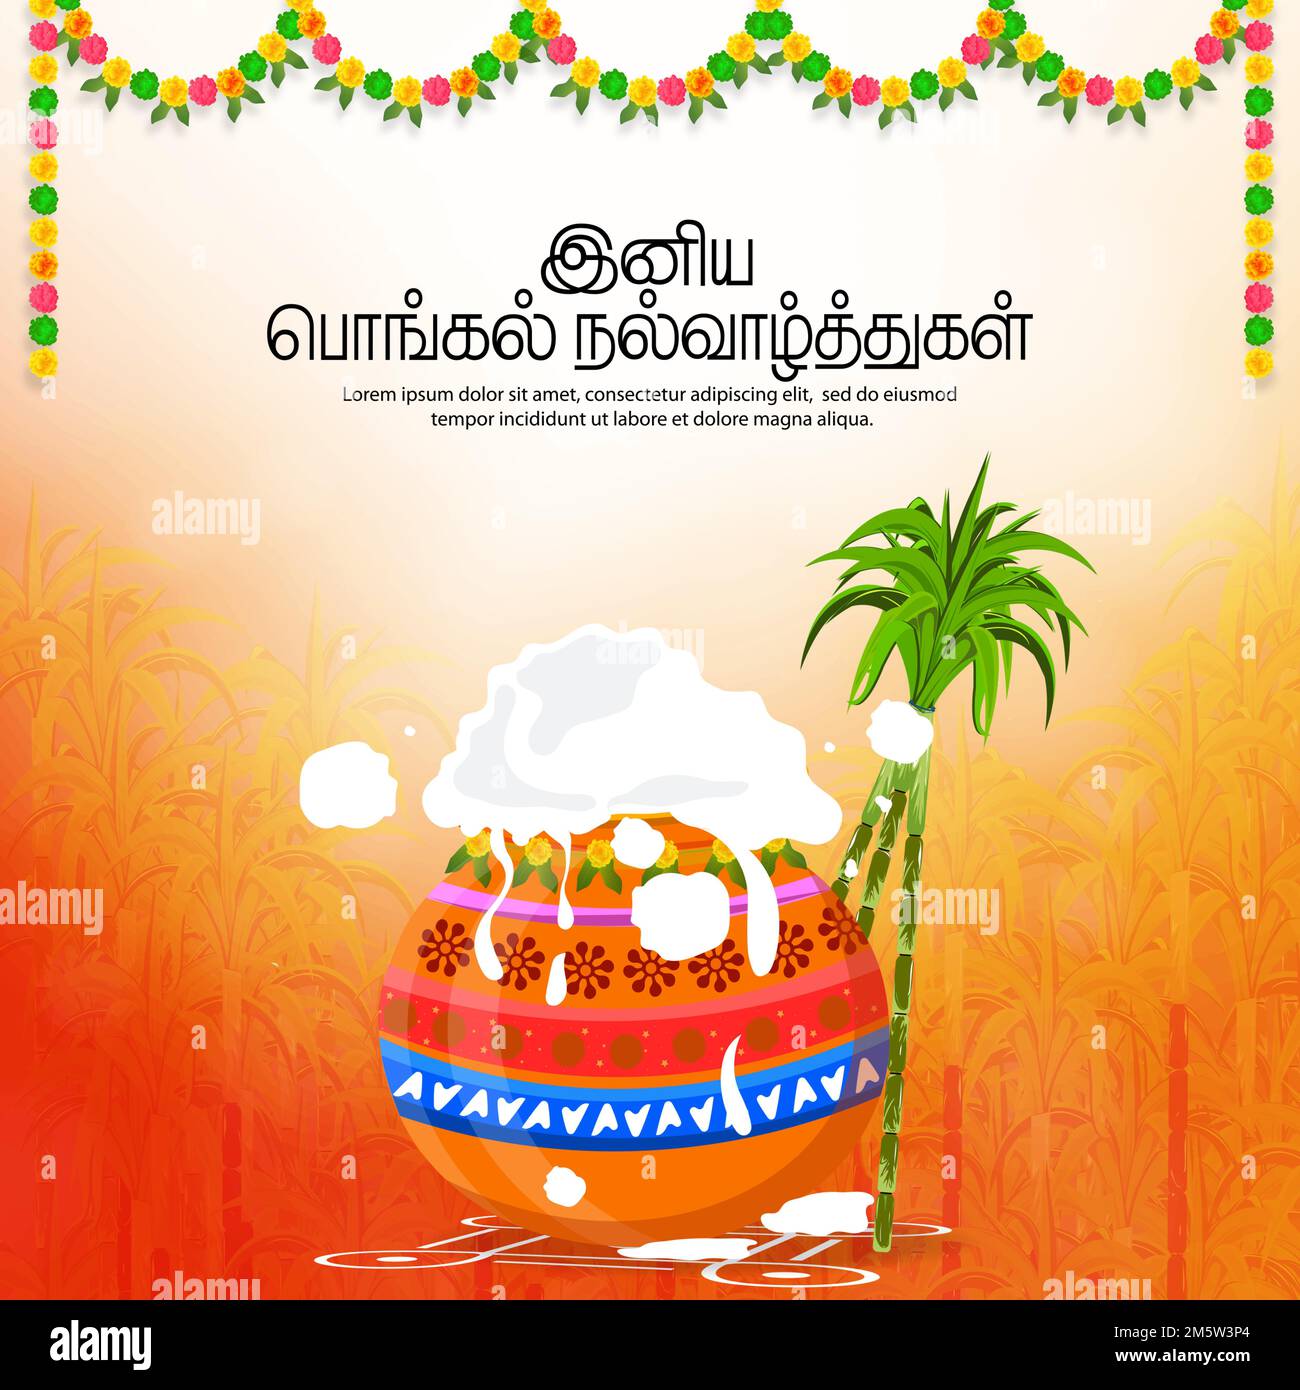 illustration of Happy Pongal Holiday Harvest Festival in South ...